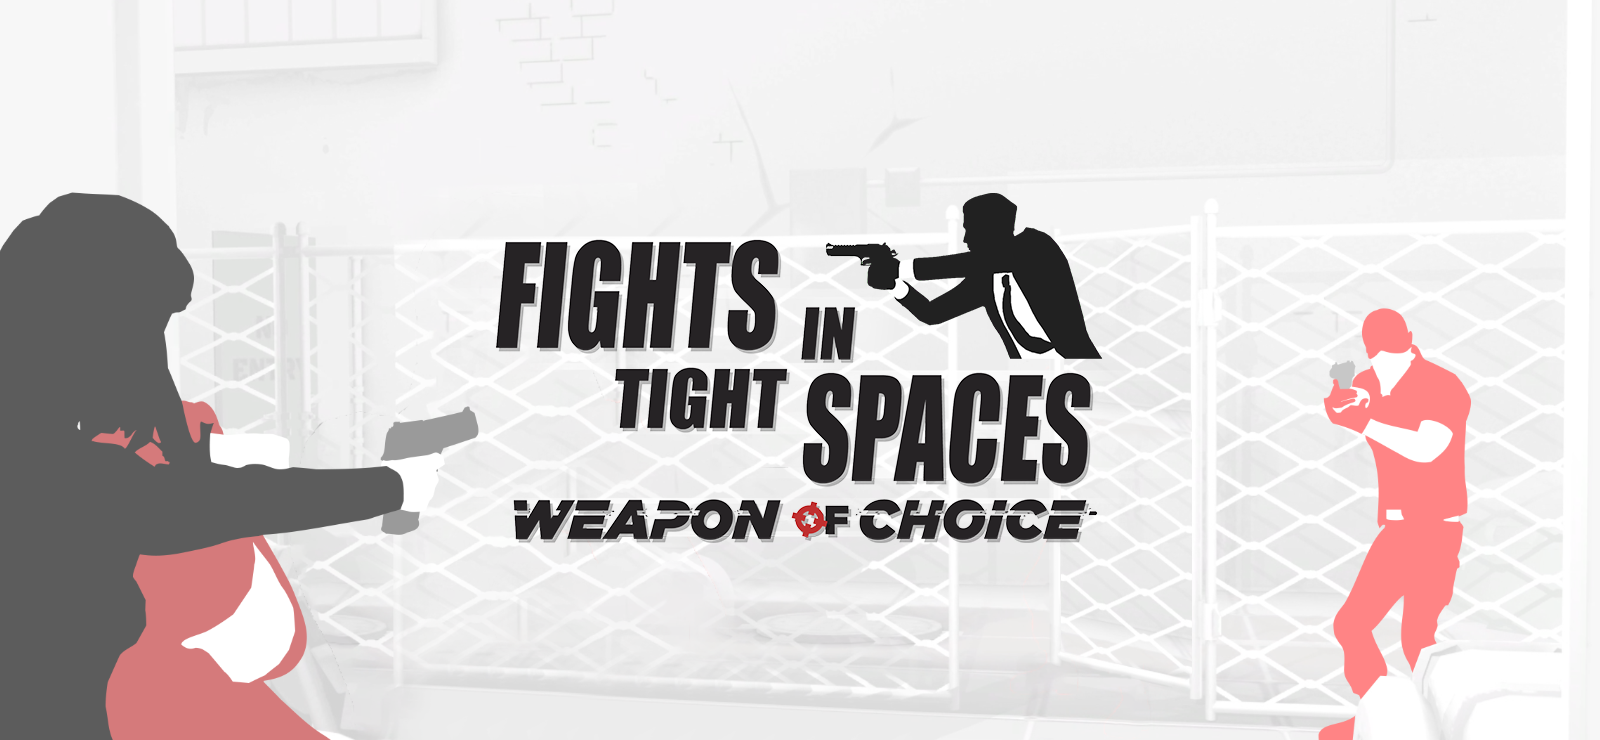 Fights In Tight Spaces - Weapon Of Choice